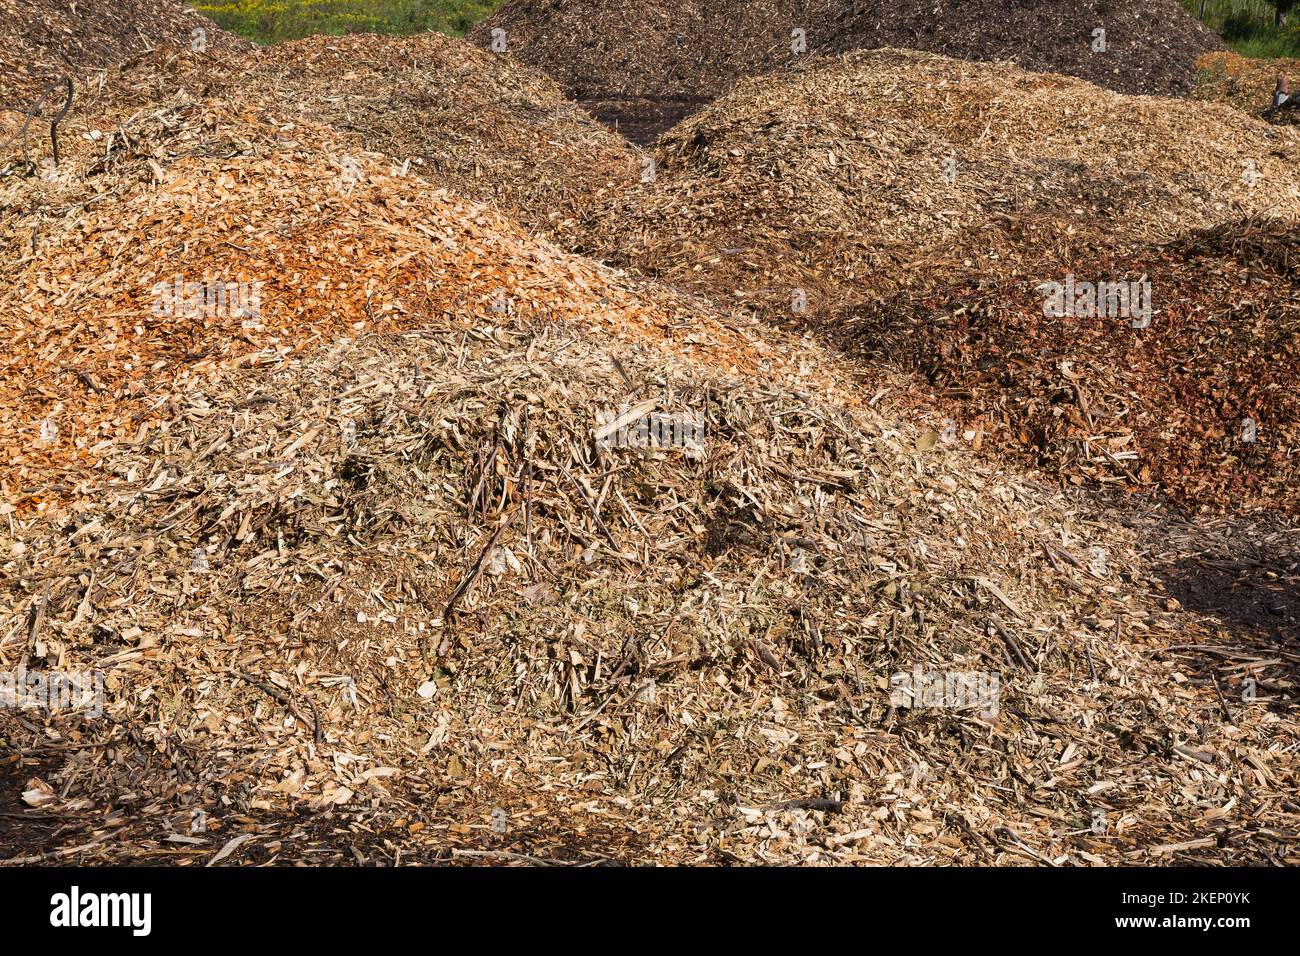 Mounds of mulch made from wood chips, leaves and twigs. Stock Photo